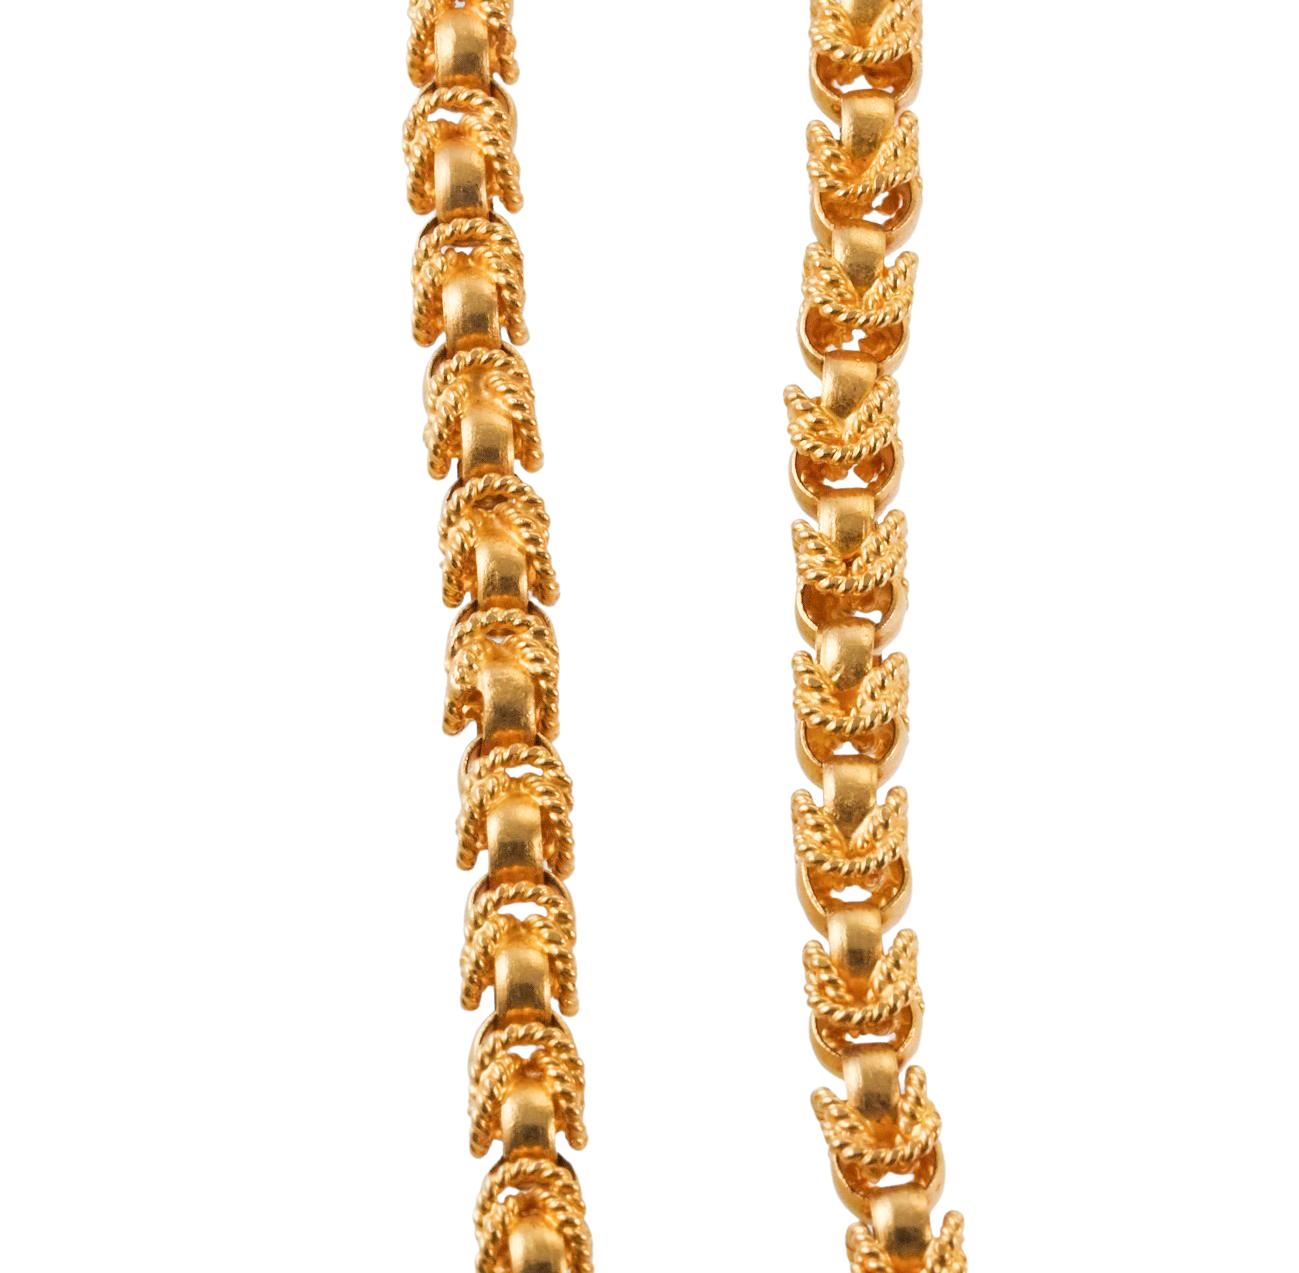 18k yellow gold extra long chain necklace, featuring intricate link design - woven and polished circle interlocked.  The necklace has no clasp/no opening, and is 54